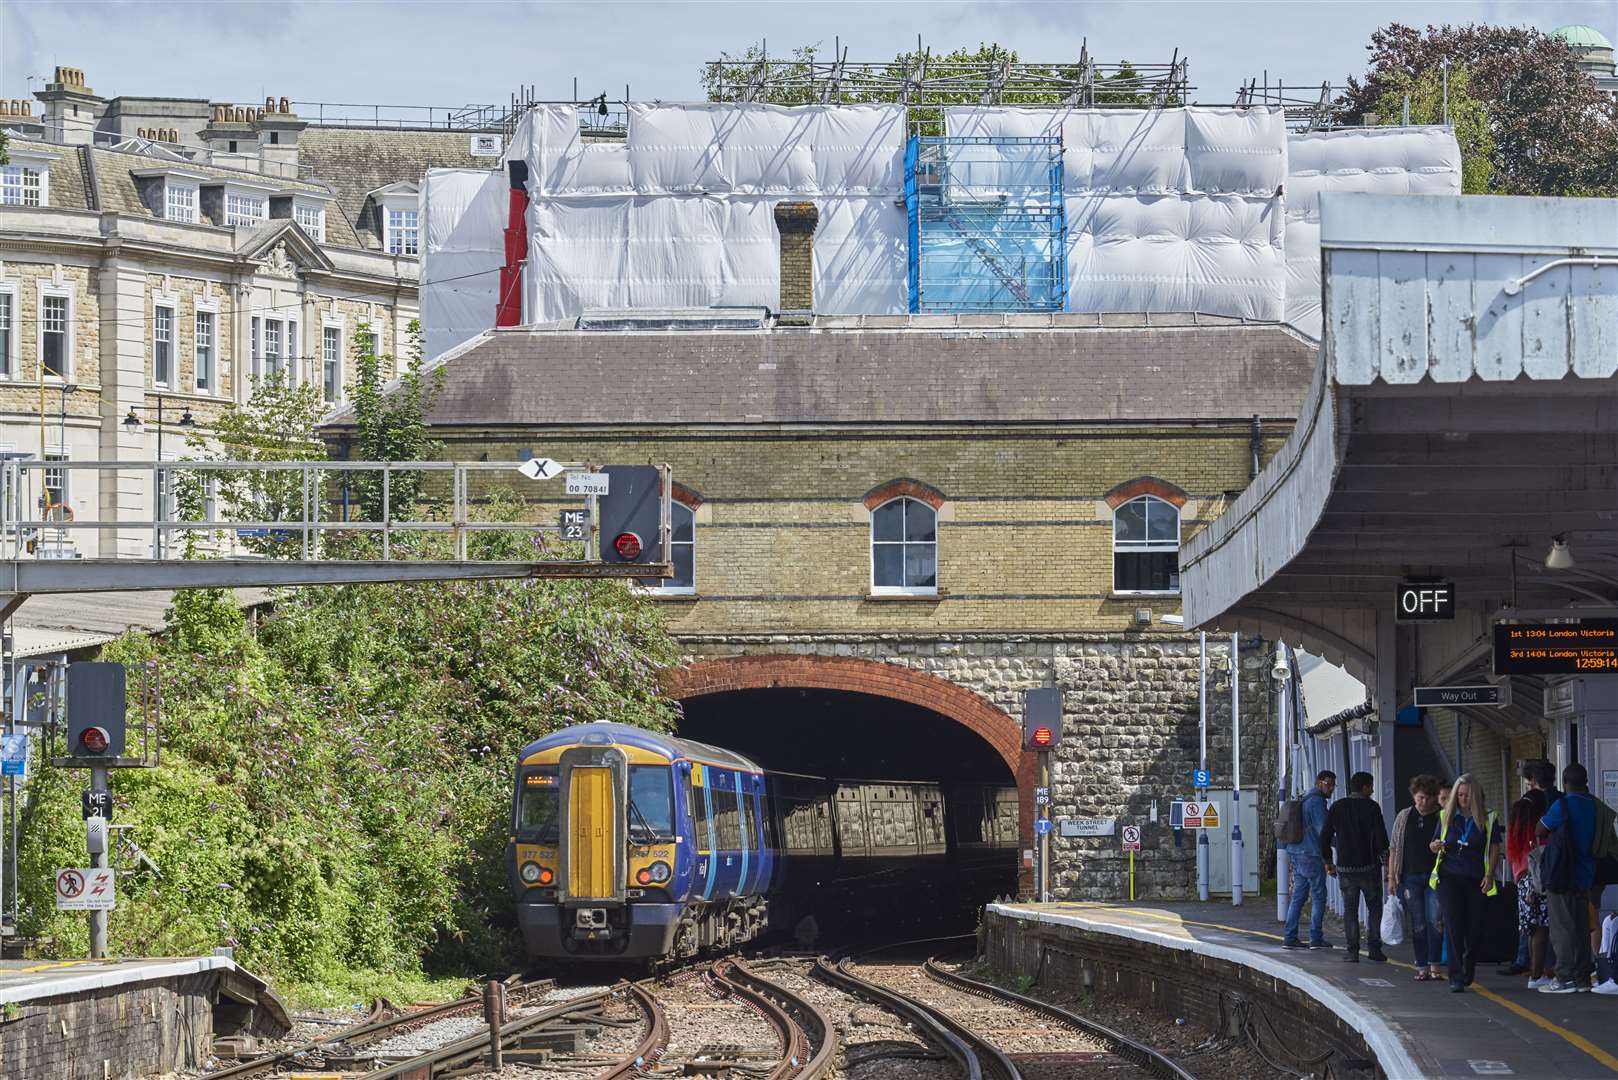 Scaffolding around The Vic above the Maidstone East railway tunnel